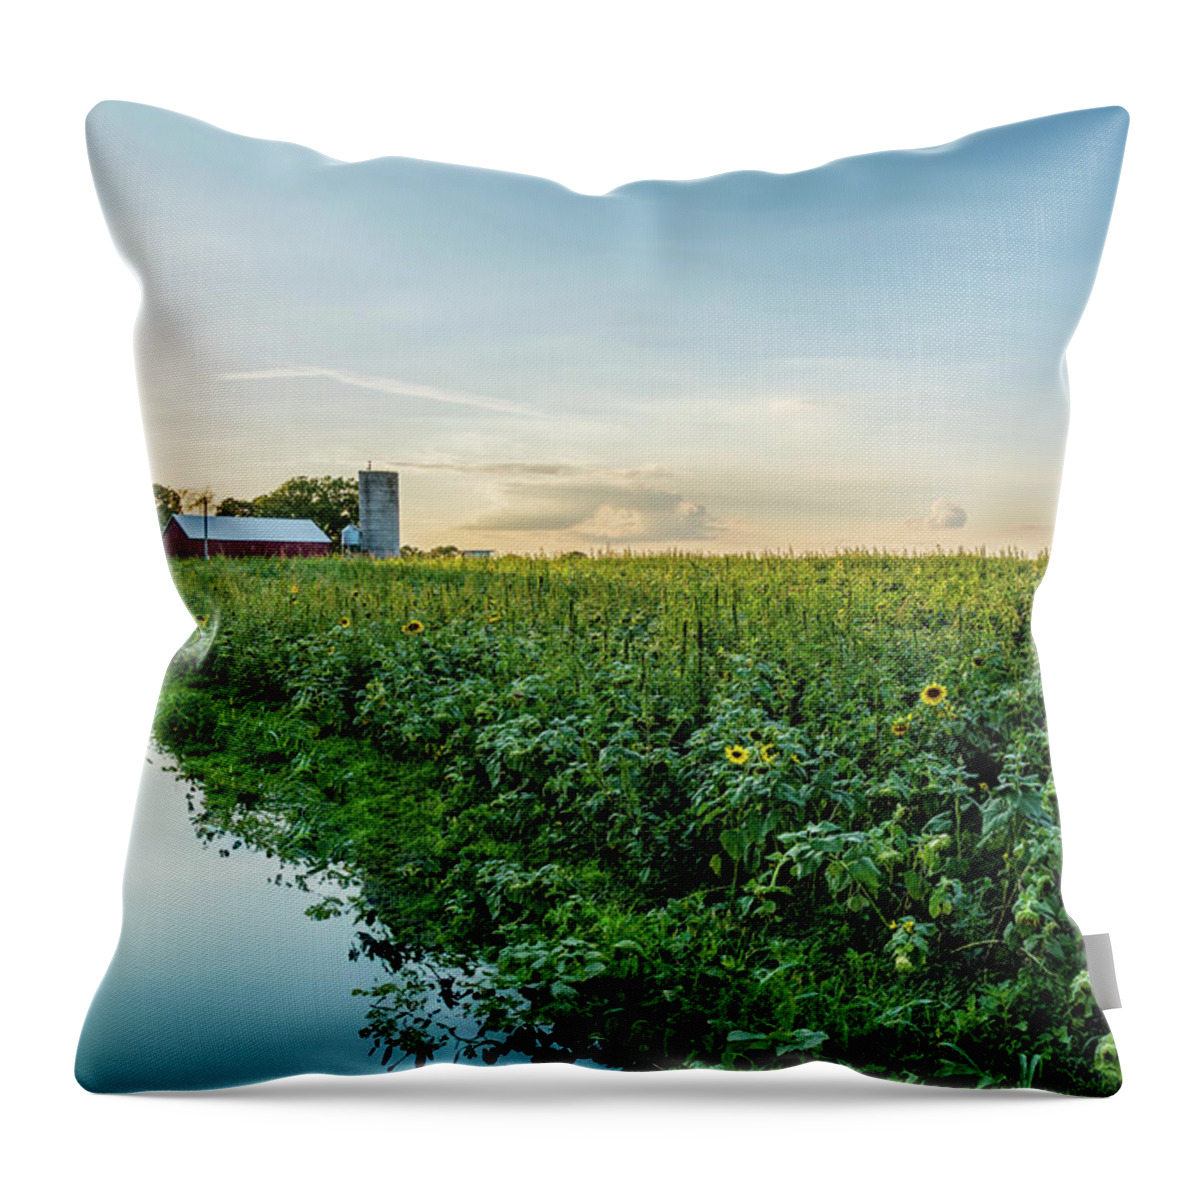 Sunflower Throw Pillow featuring the photograph Sunflower Field Reflections by Jennifer White